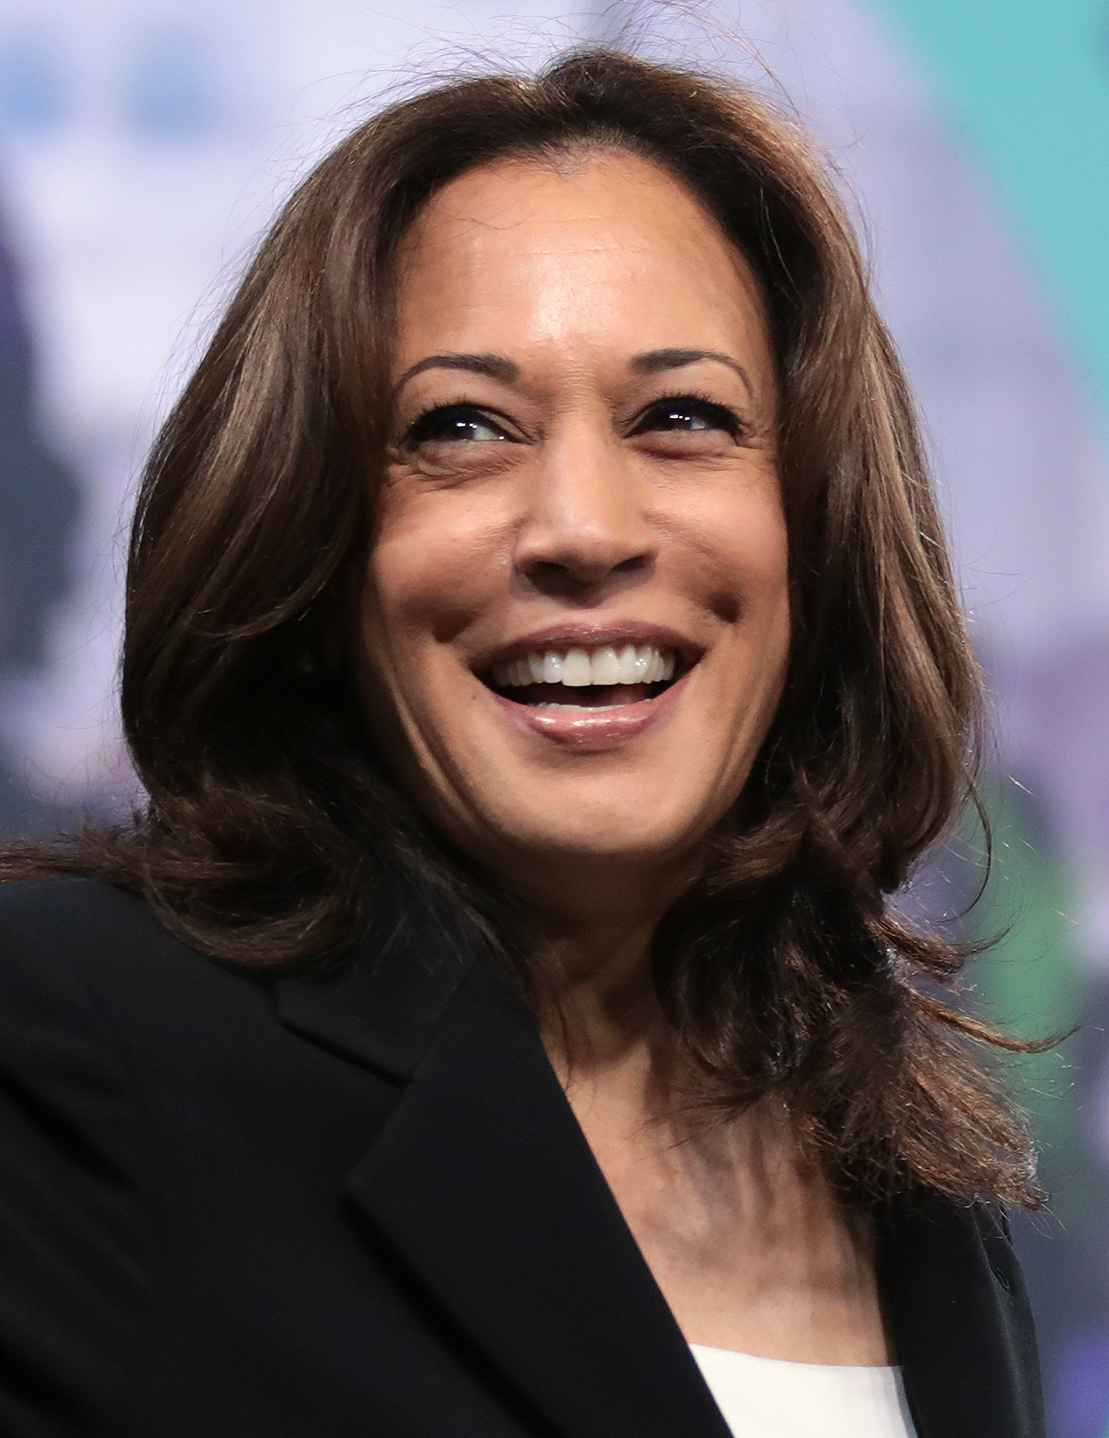 Vp Scandal Kamala Harris Accused Of Sleeping With Married Man » Thequartergrill